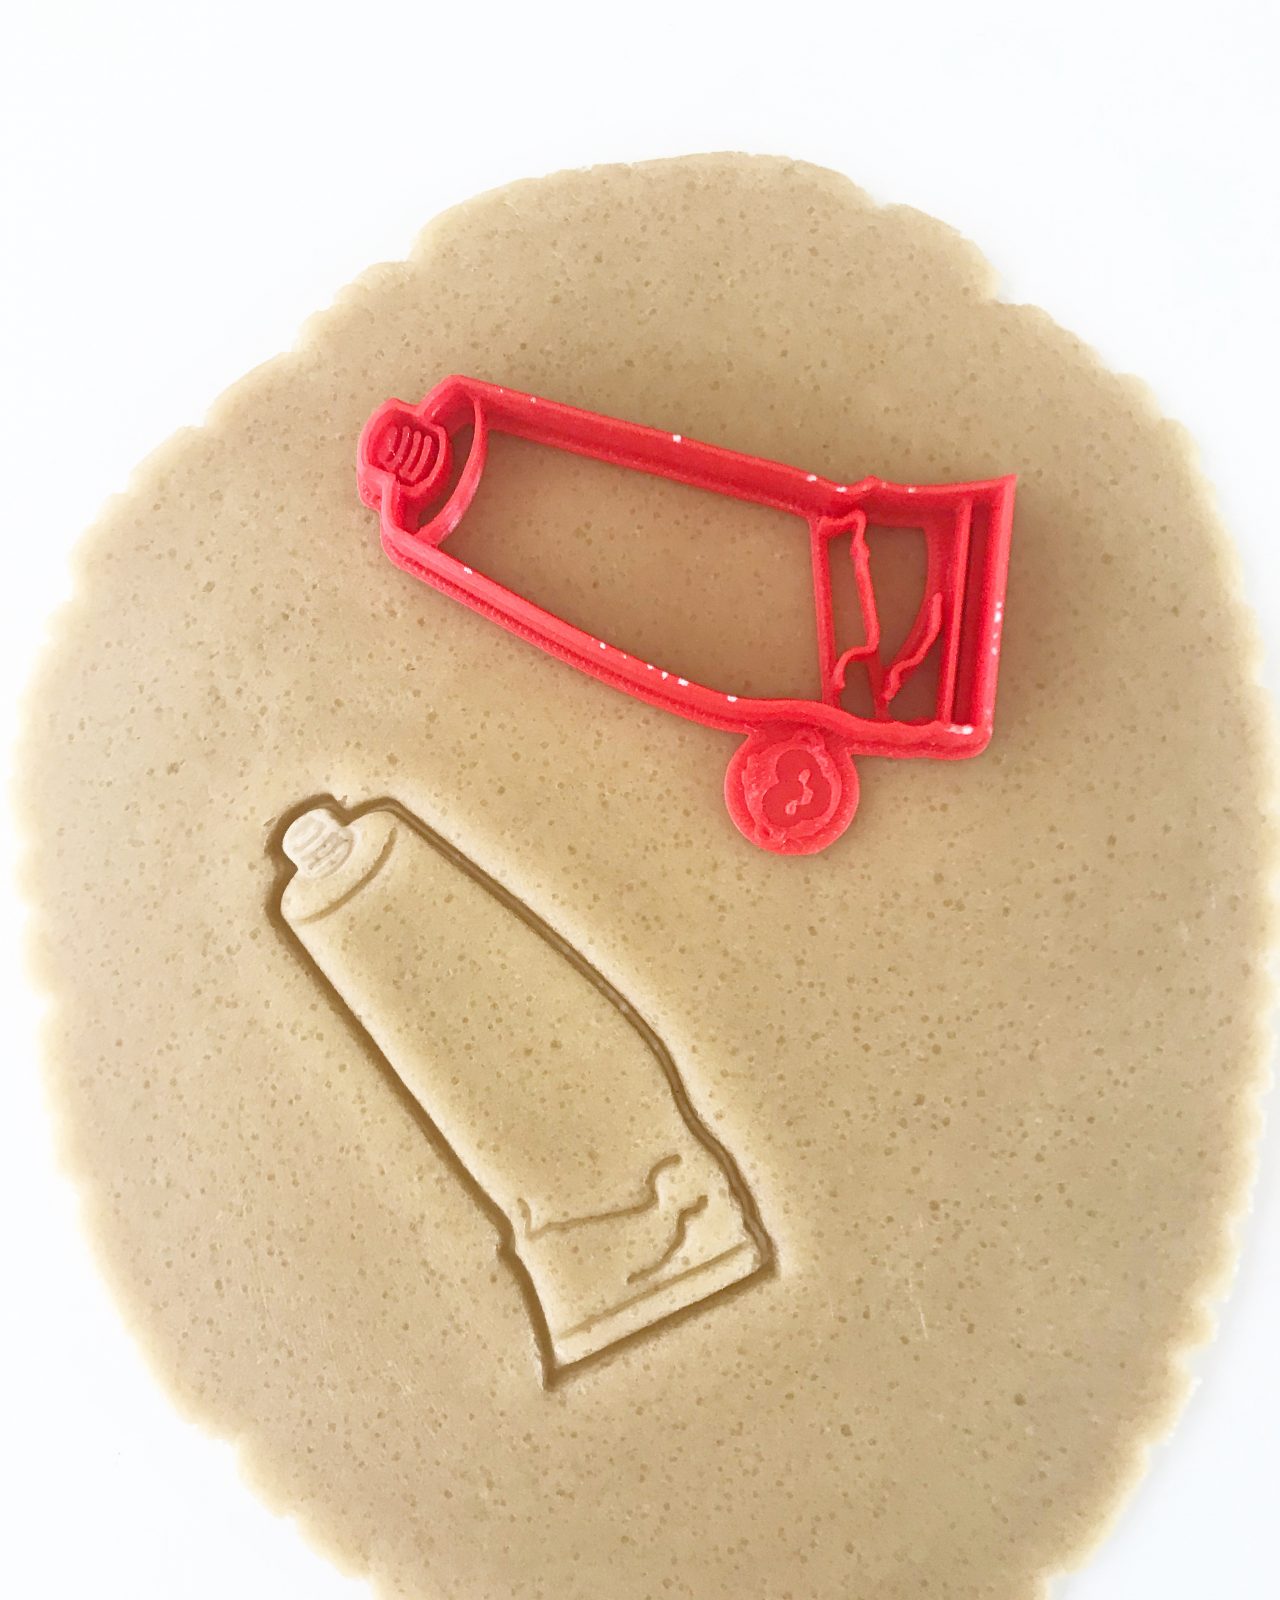 paint tube cookie cutter